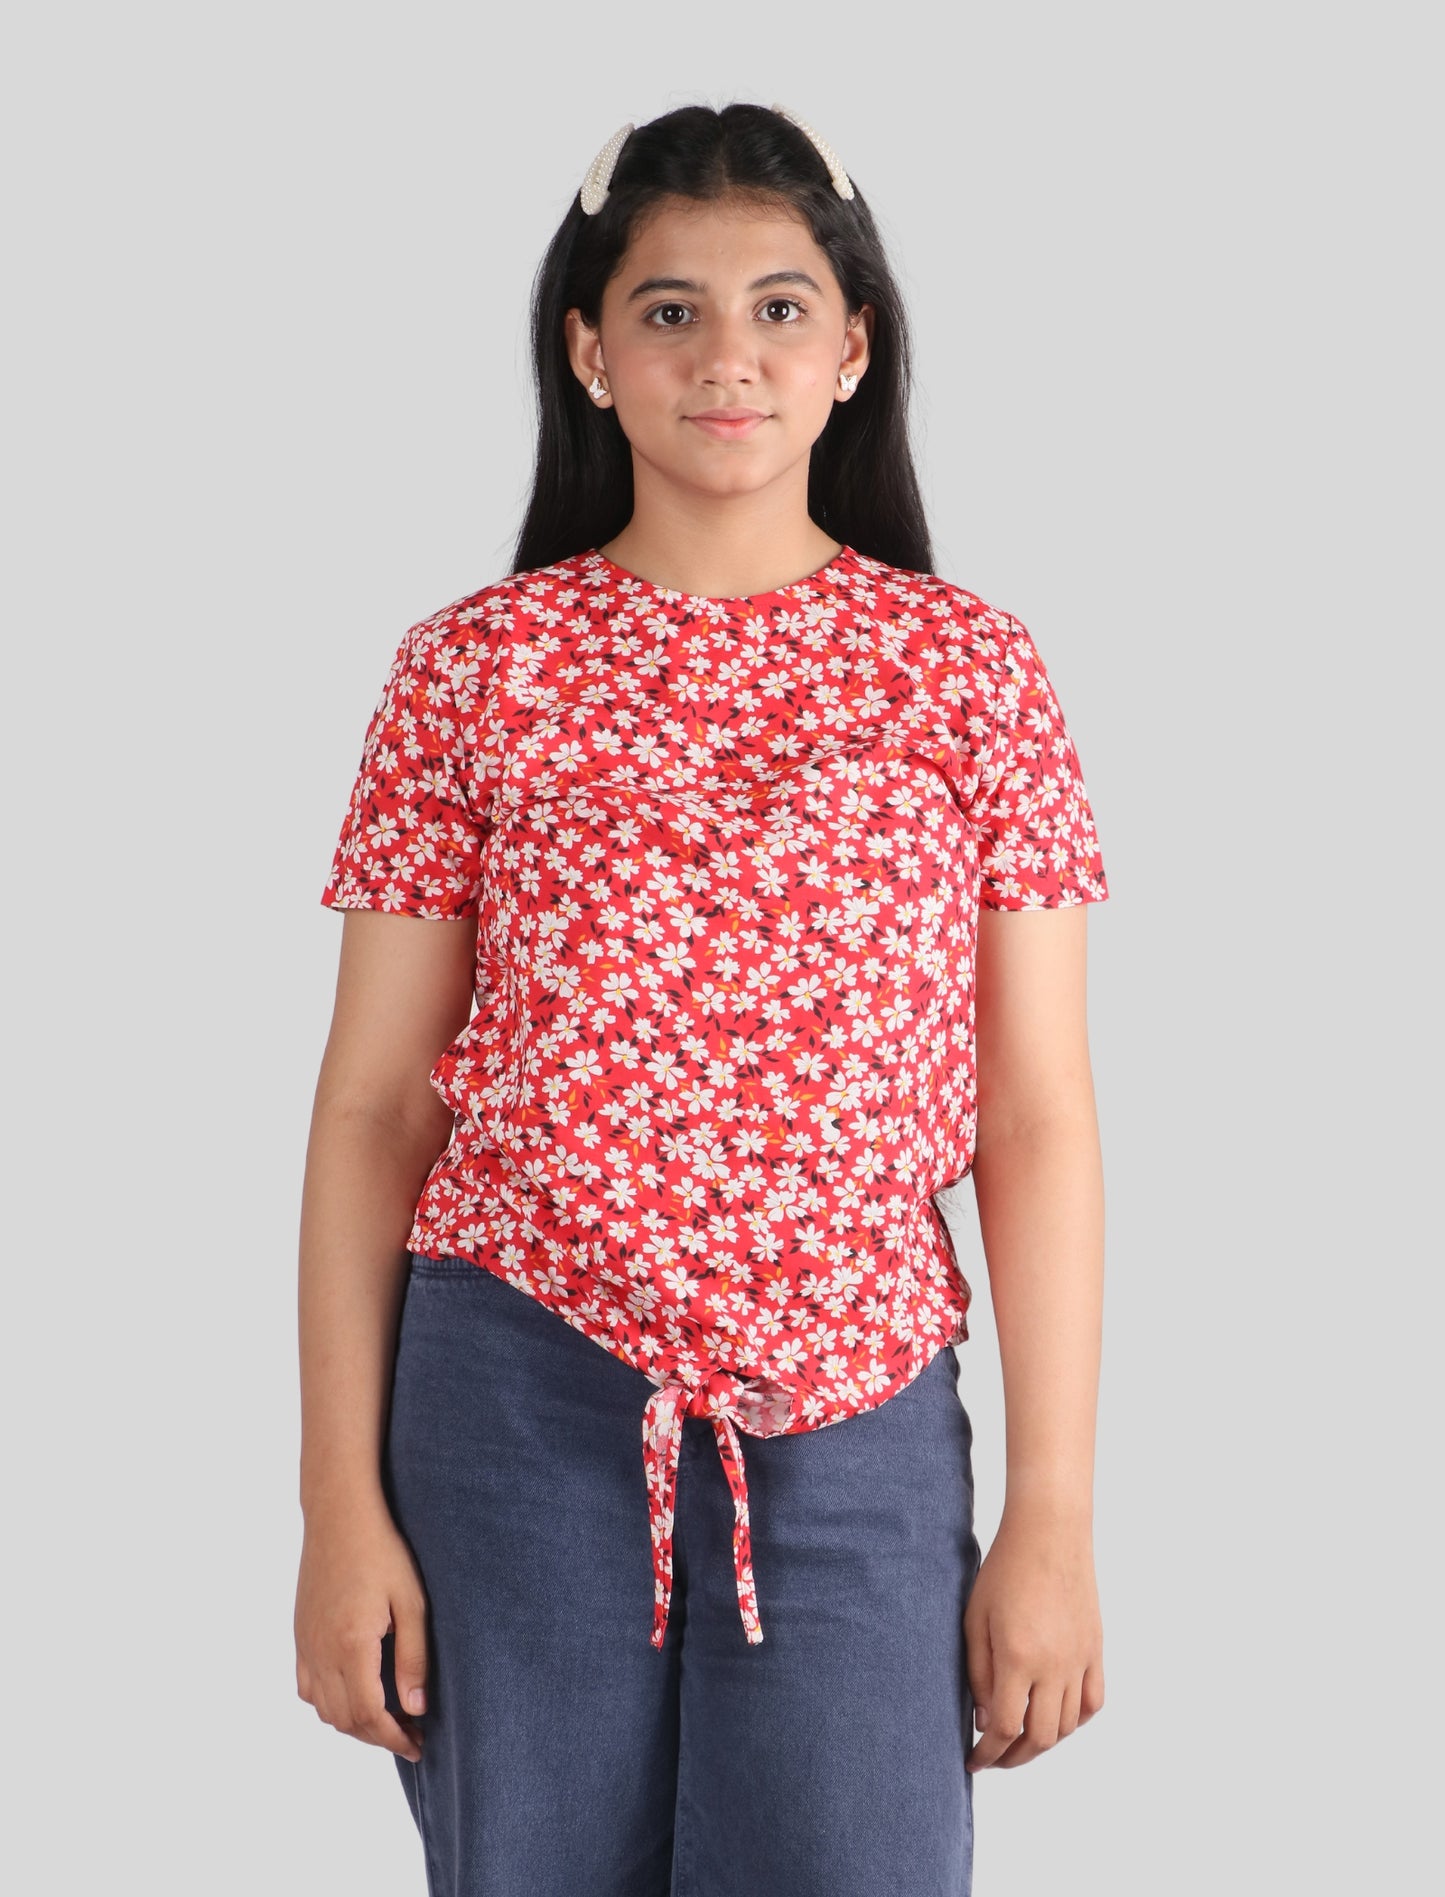 Girls Pure Rayon Floral Summer Top (Half Sleeve, Red)